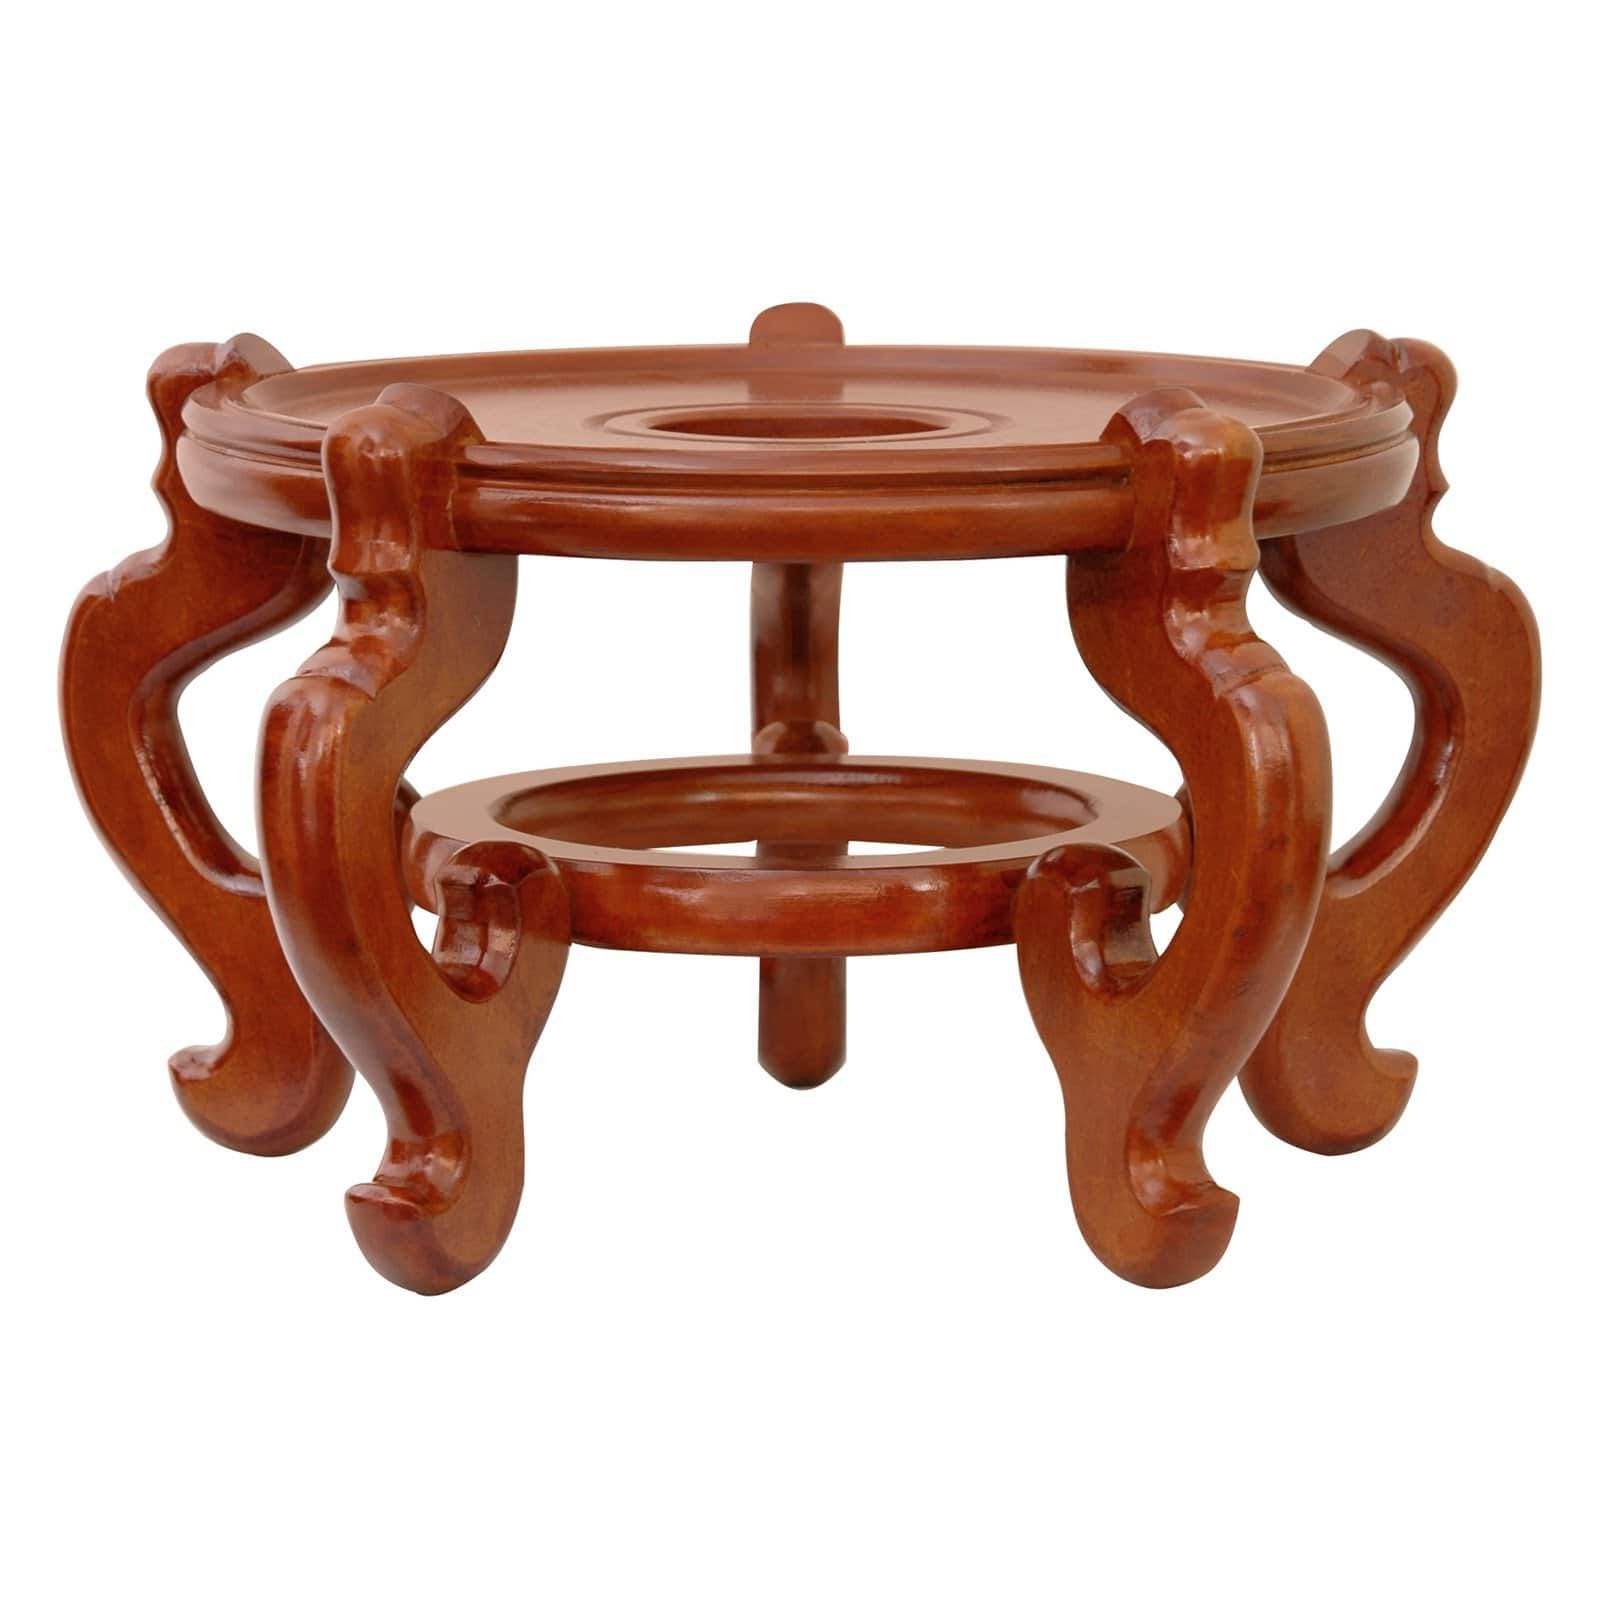 Oriental Furniture Rosewood Fishbowl Stand, Honey – Walmart With Regard To Fashionable Fishbowl Plant Stands (View 4 of 15)